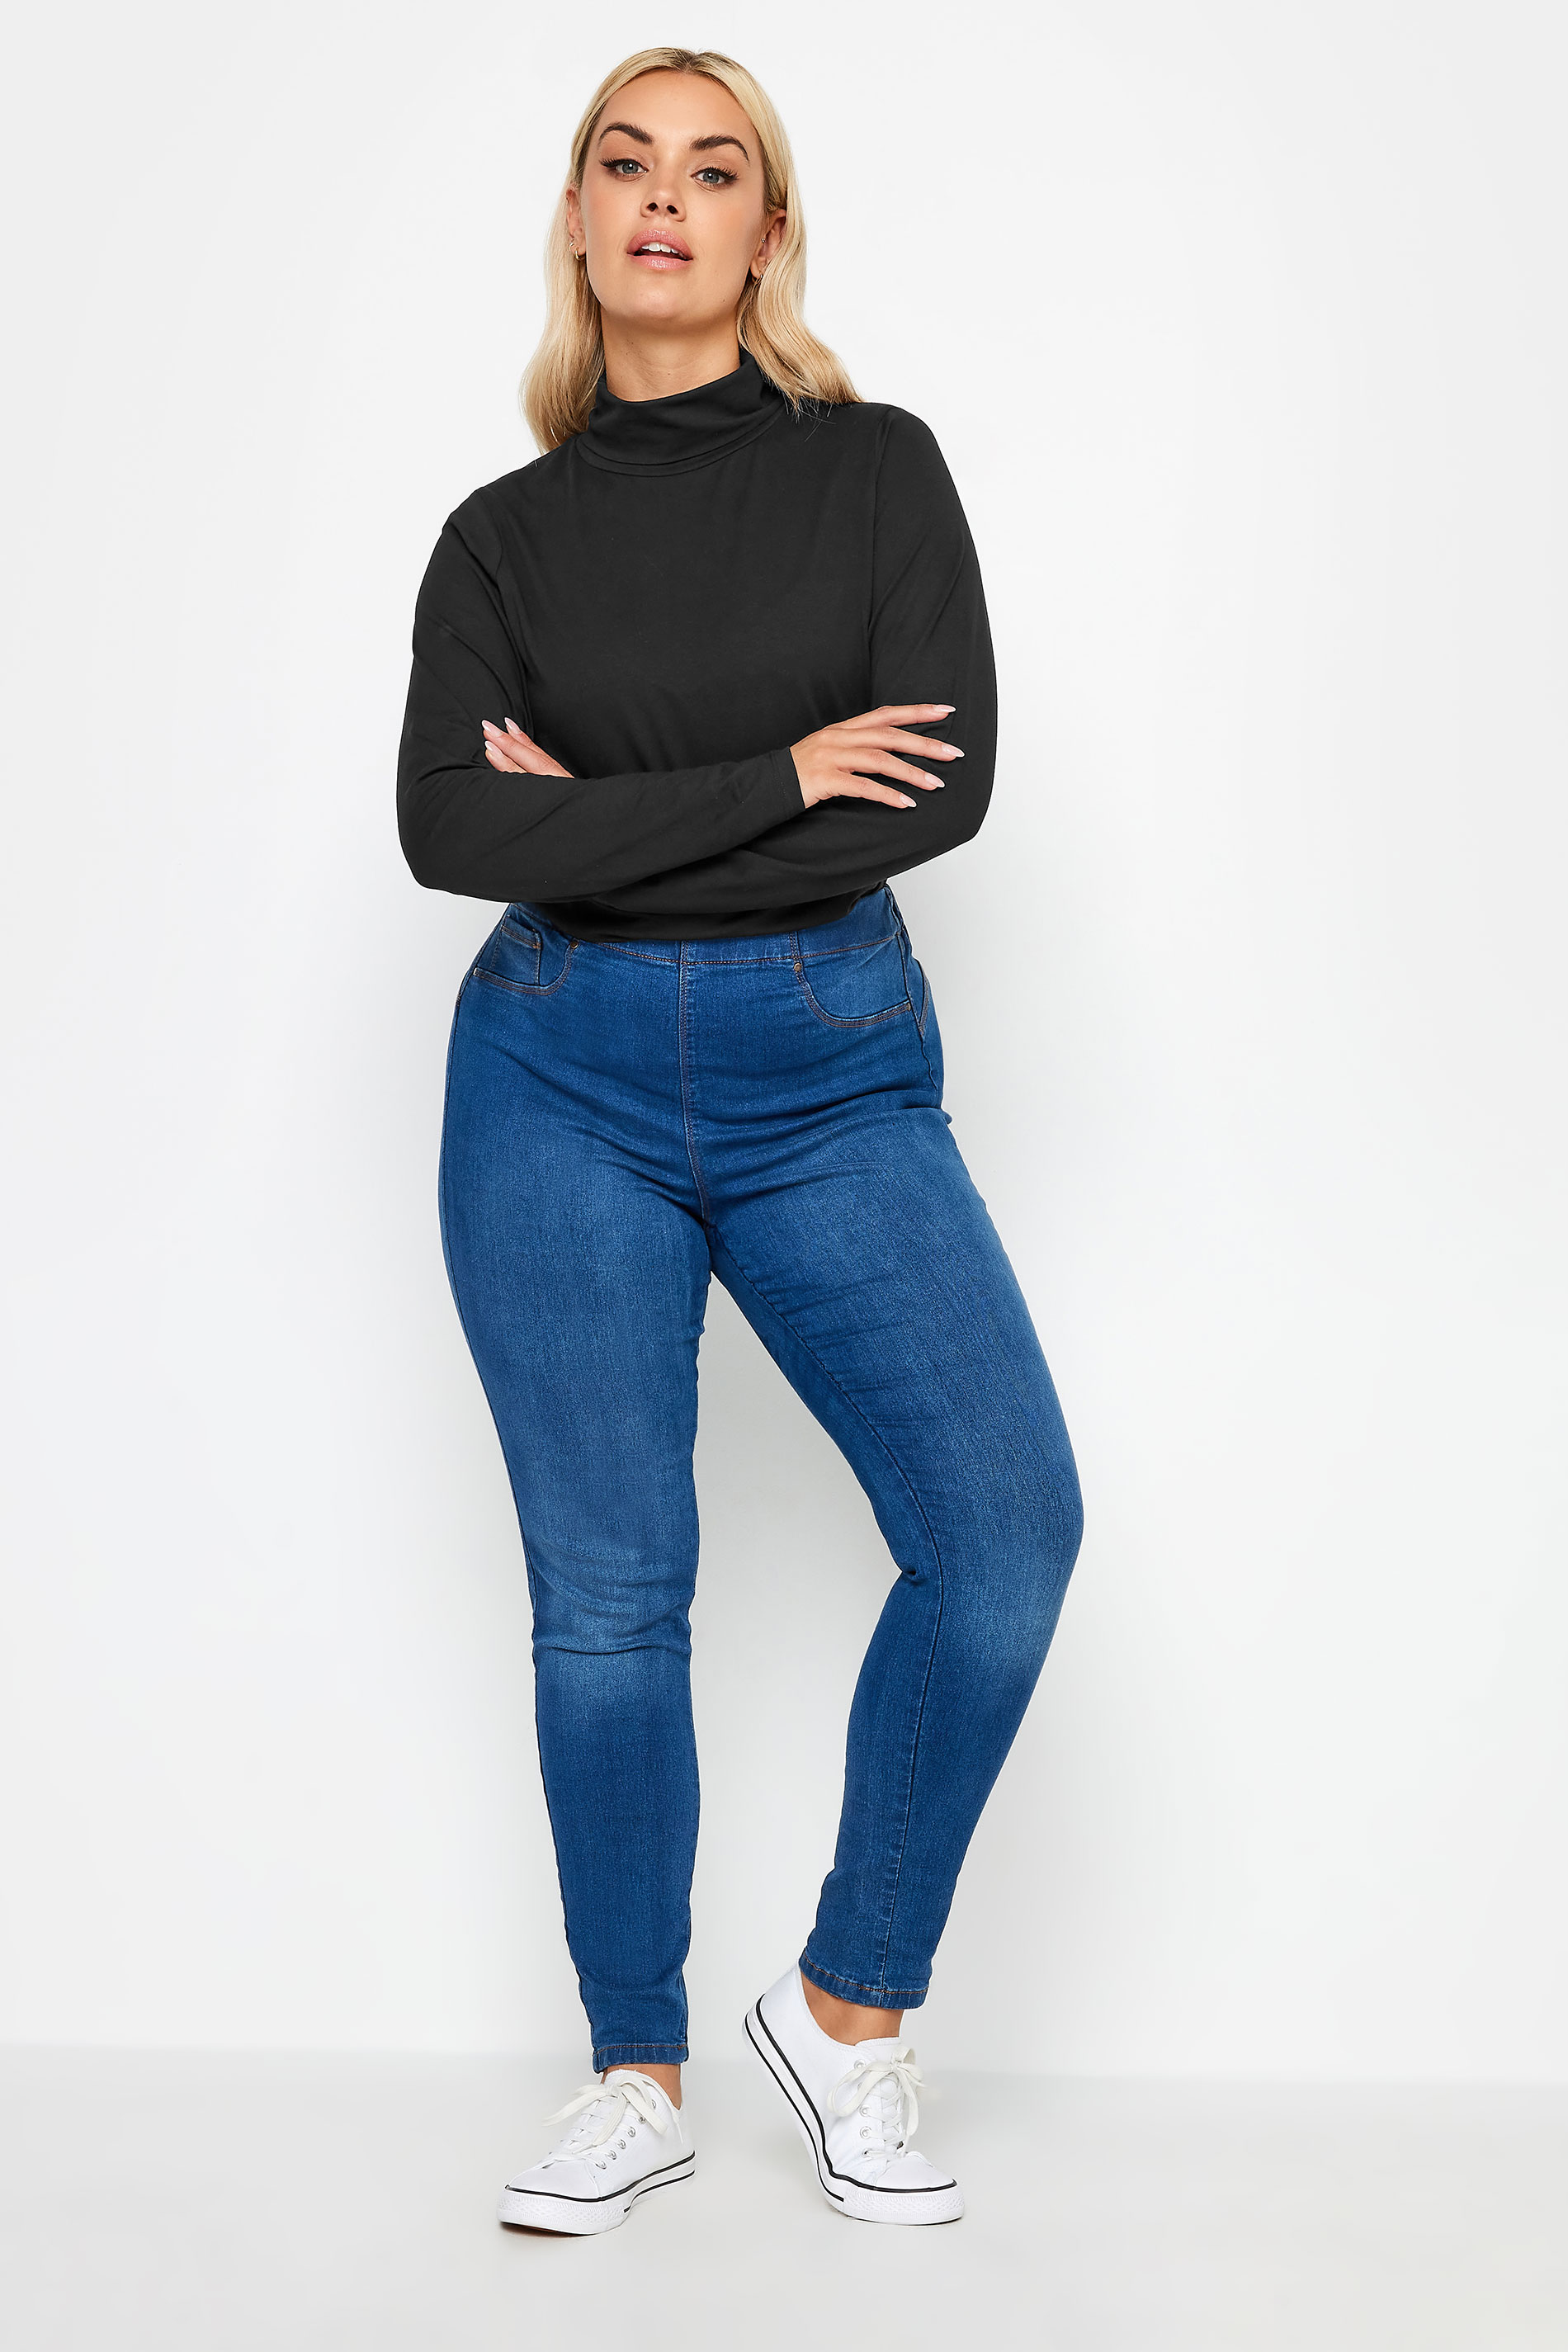 YOURS Plus Size Black Long Sleeve Turtle Neck Top | Yours Clothing 2